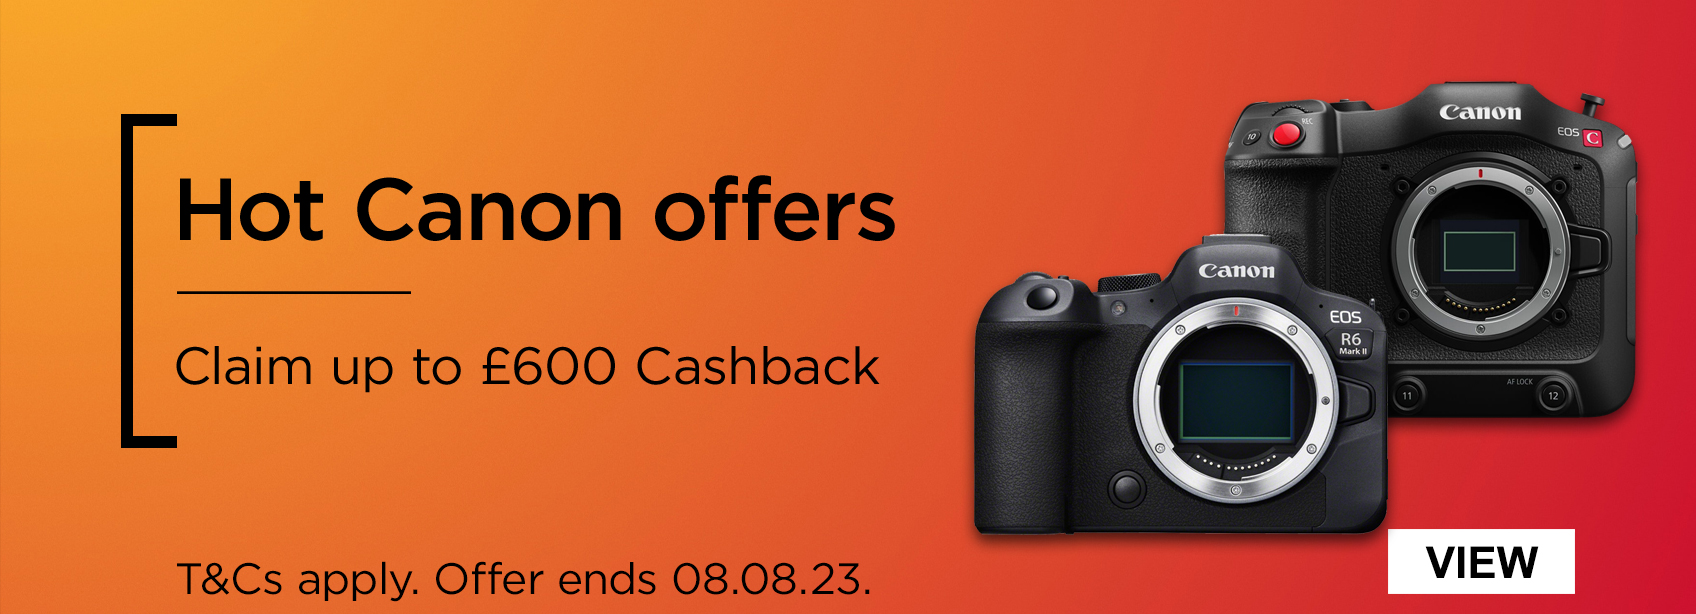 Hot Canon offers. Claim up to £600 cashback. T&Cs apply. Offer ends 08.08.23